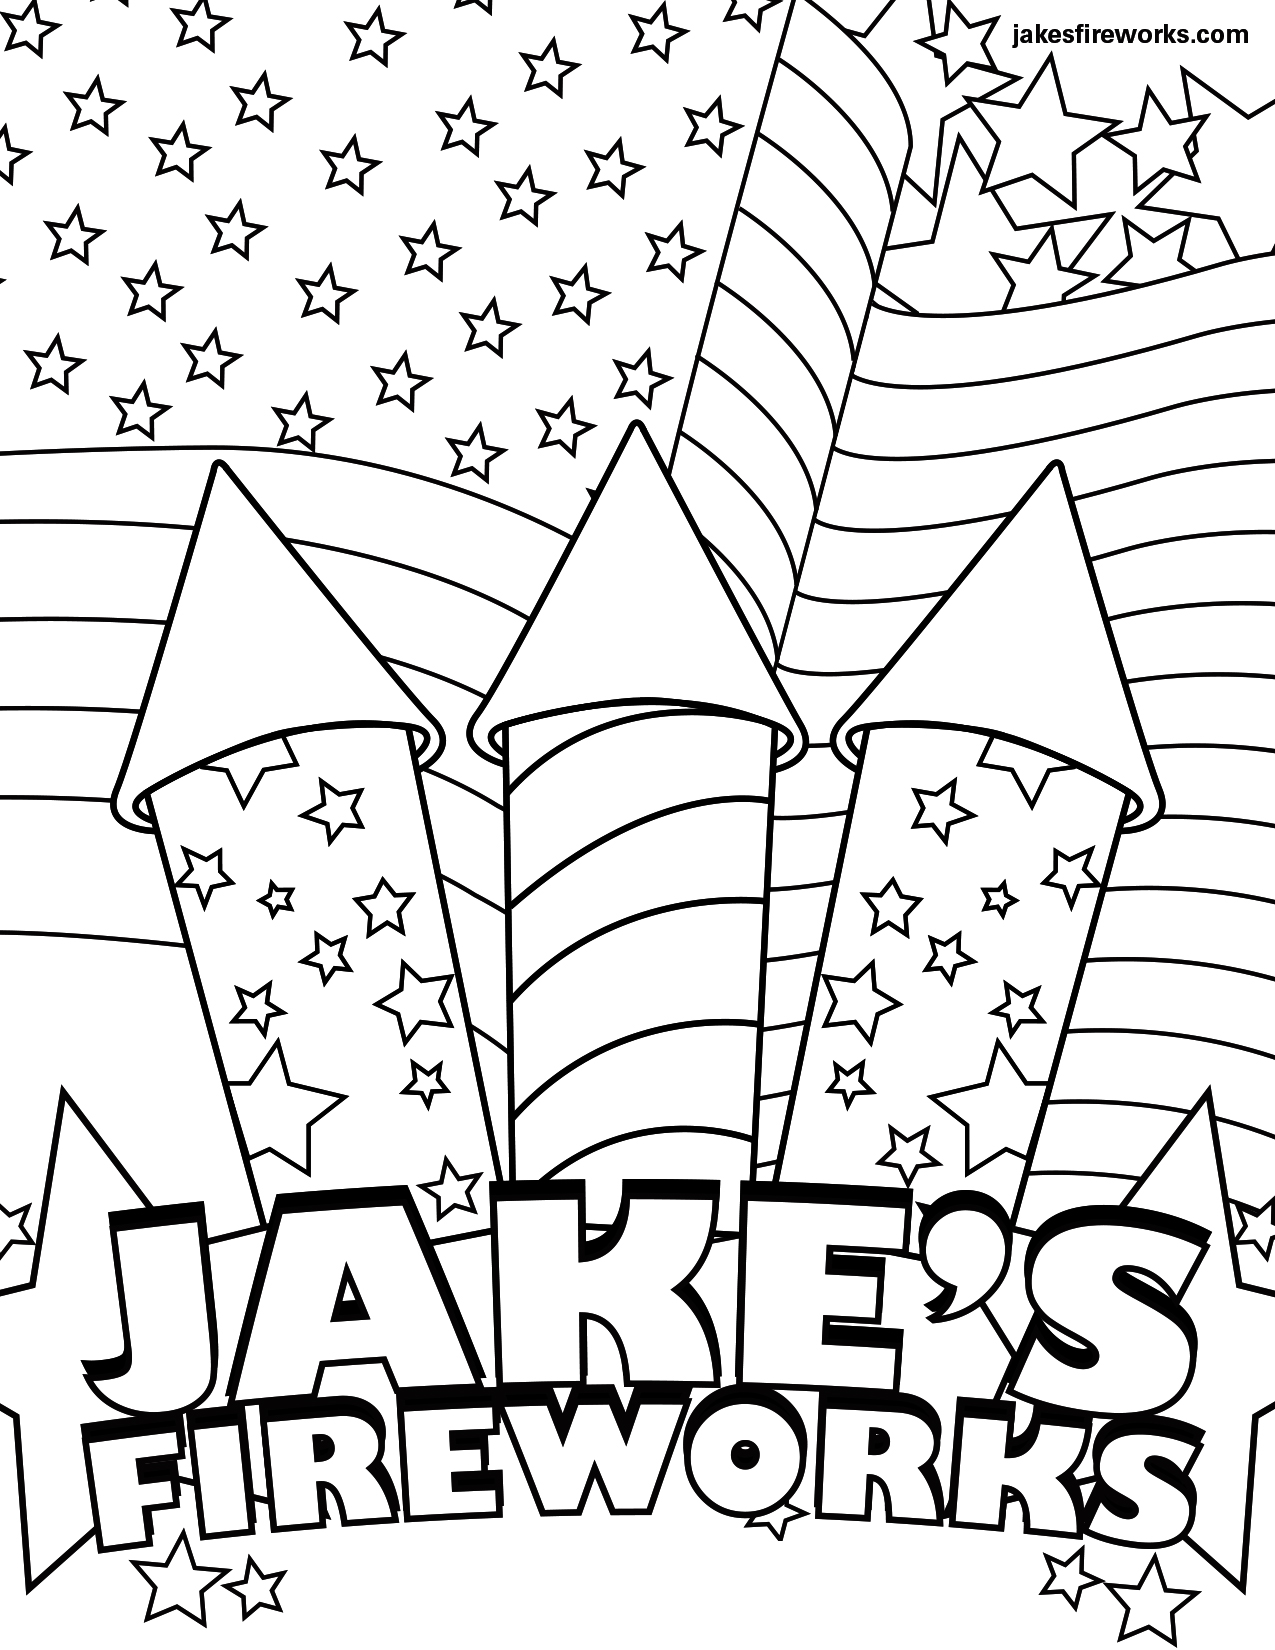 diwali crackers coloring pages